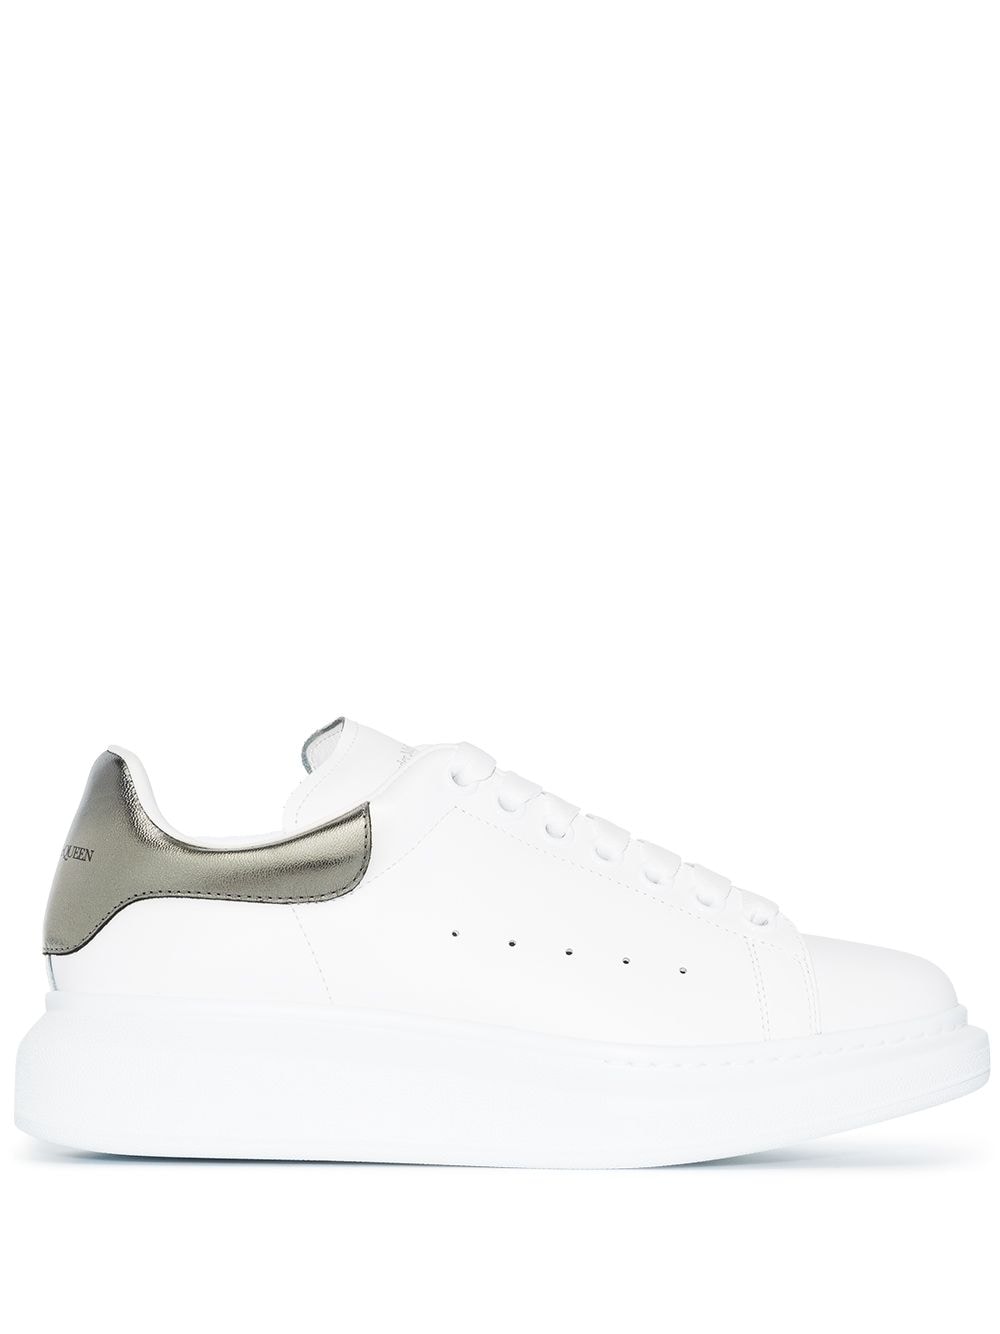 White/pearl grey leather colour-block chunky sneakers